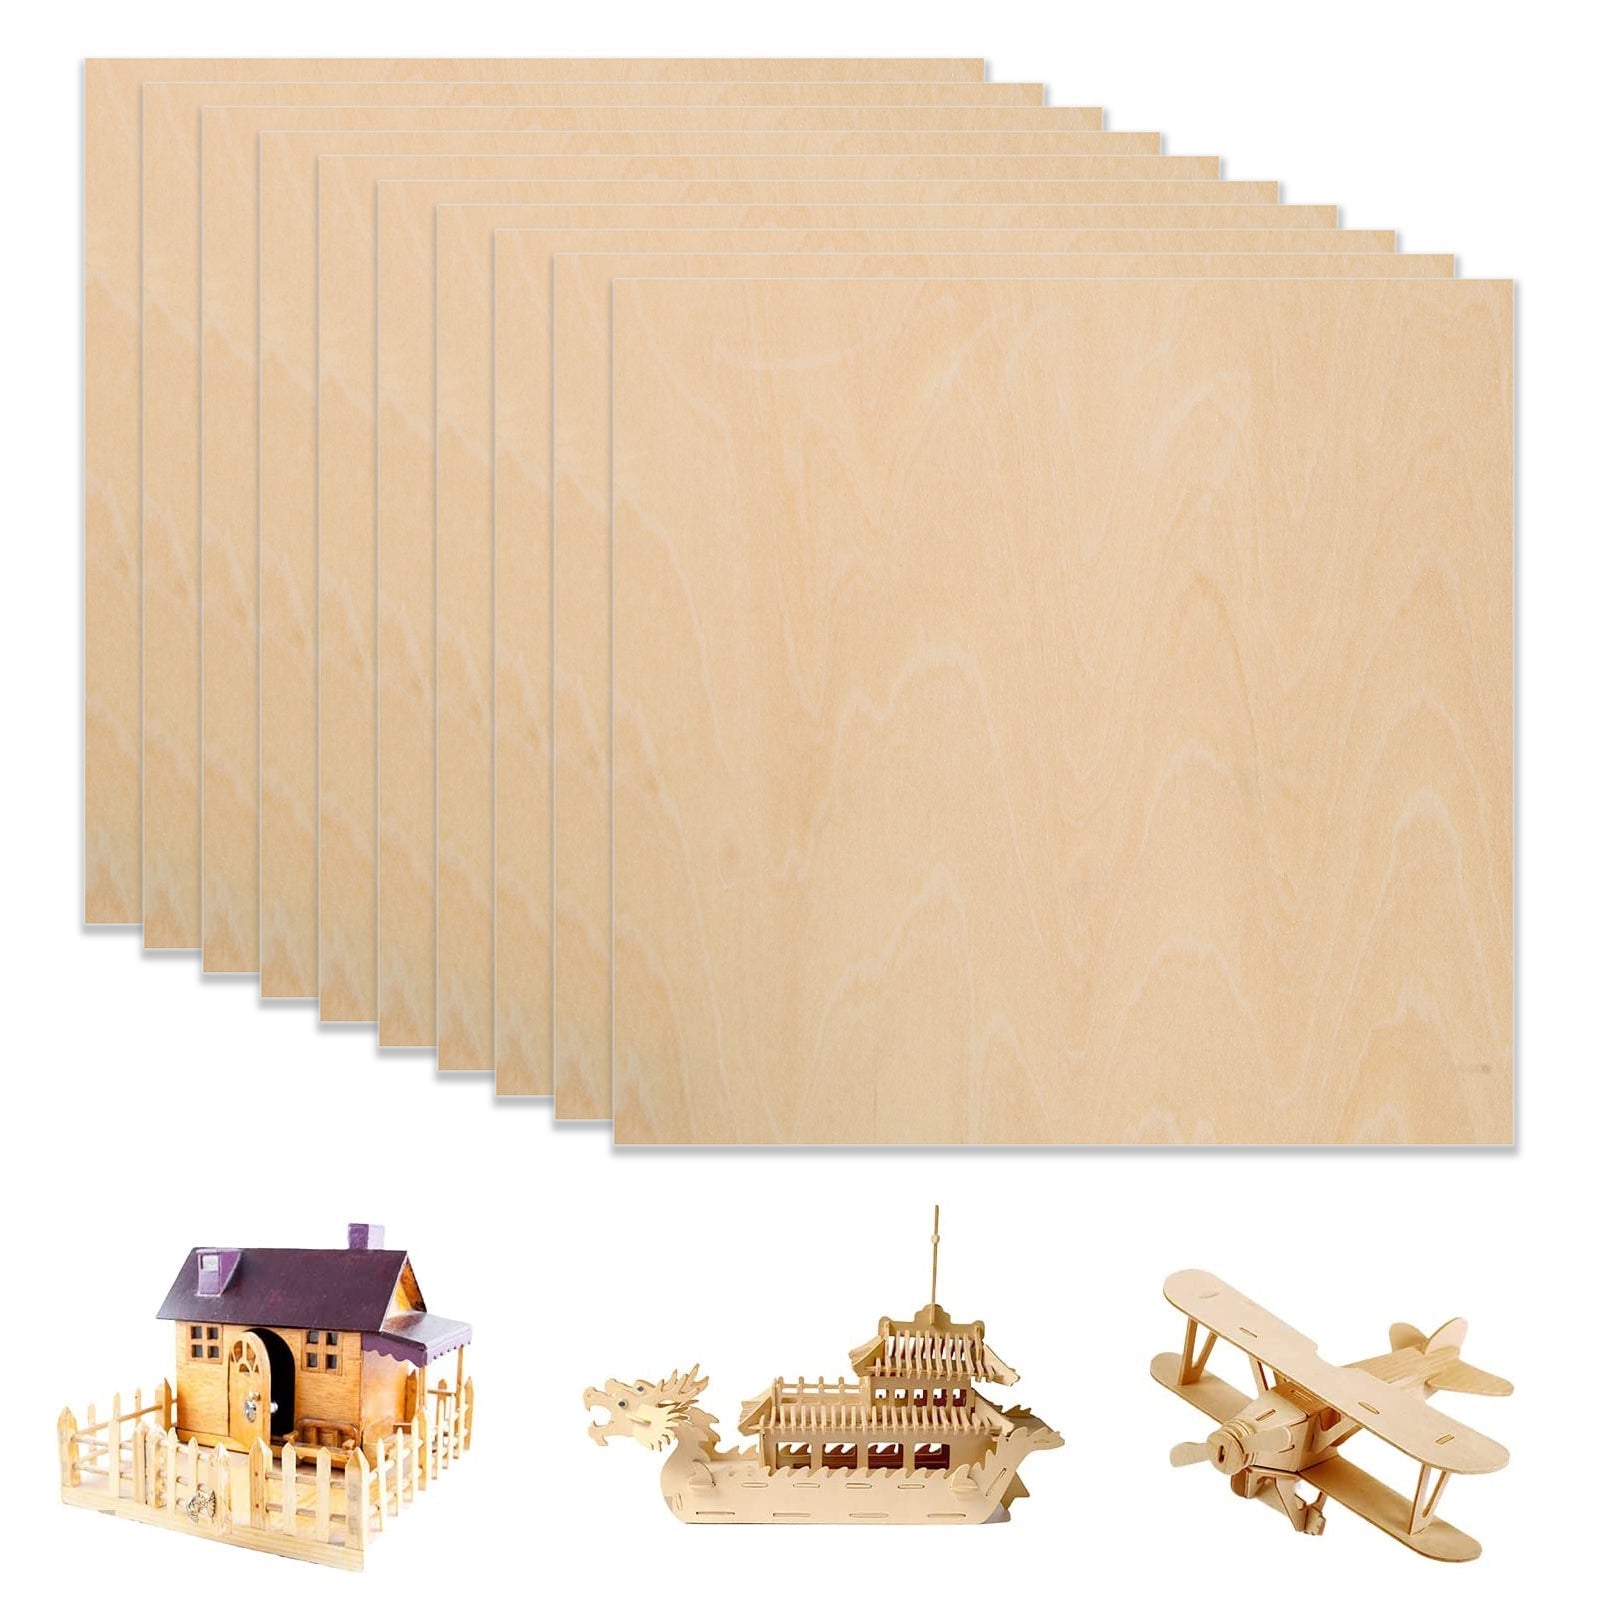 A4 Plywood Sheets 11.8*11.8*1/8” for Falcon Laser Engraving and Cutting - Pack of 10pcs